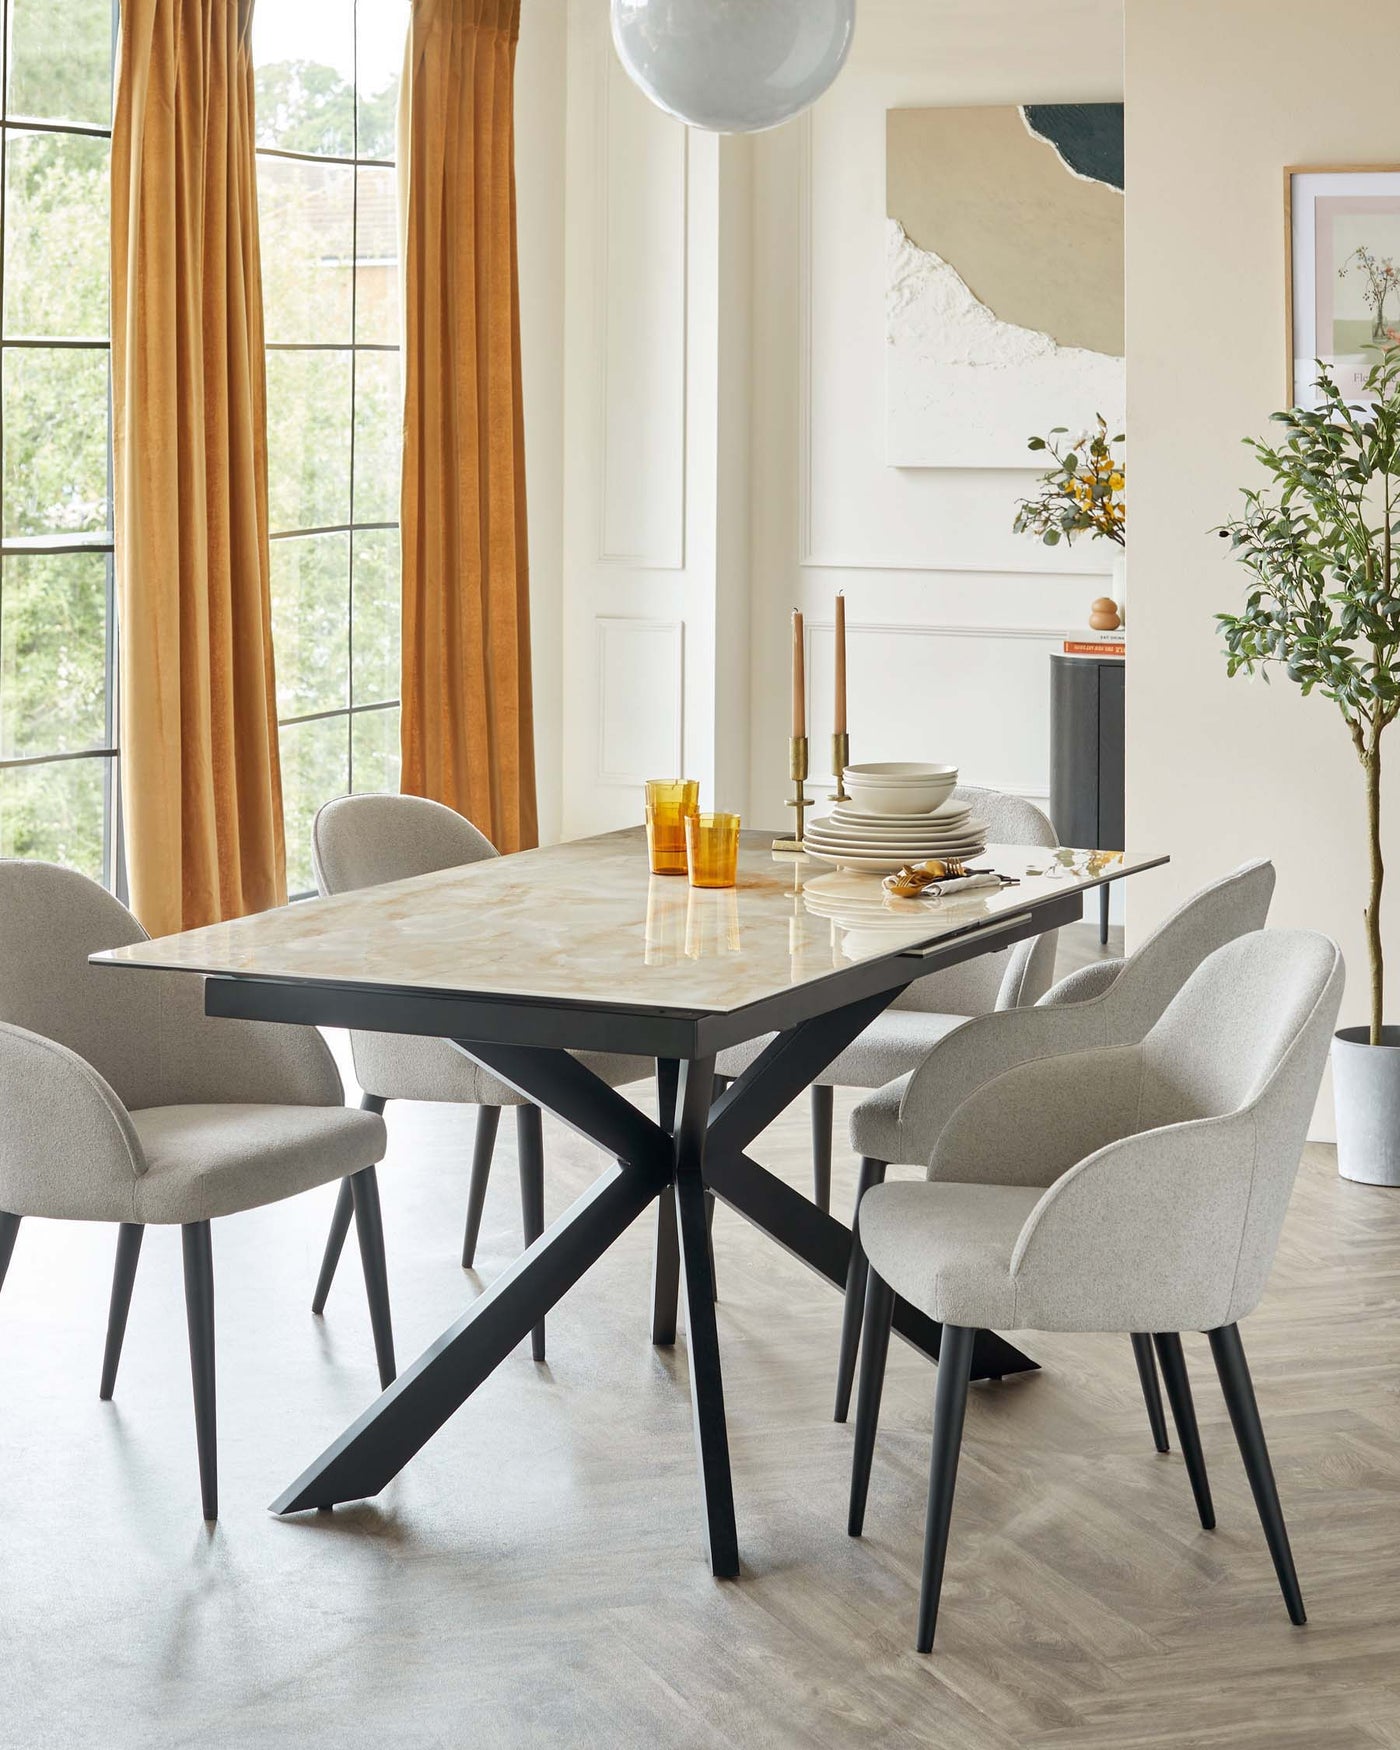 Modern dining room with a rectangular marble-top table featuring a geometric black metal base. Accompanied by four elegant, light grey upholstered chairs with a smooth, curved design and black legs. Warm natural light filters through large windows with golden curtains accentuating the space.